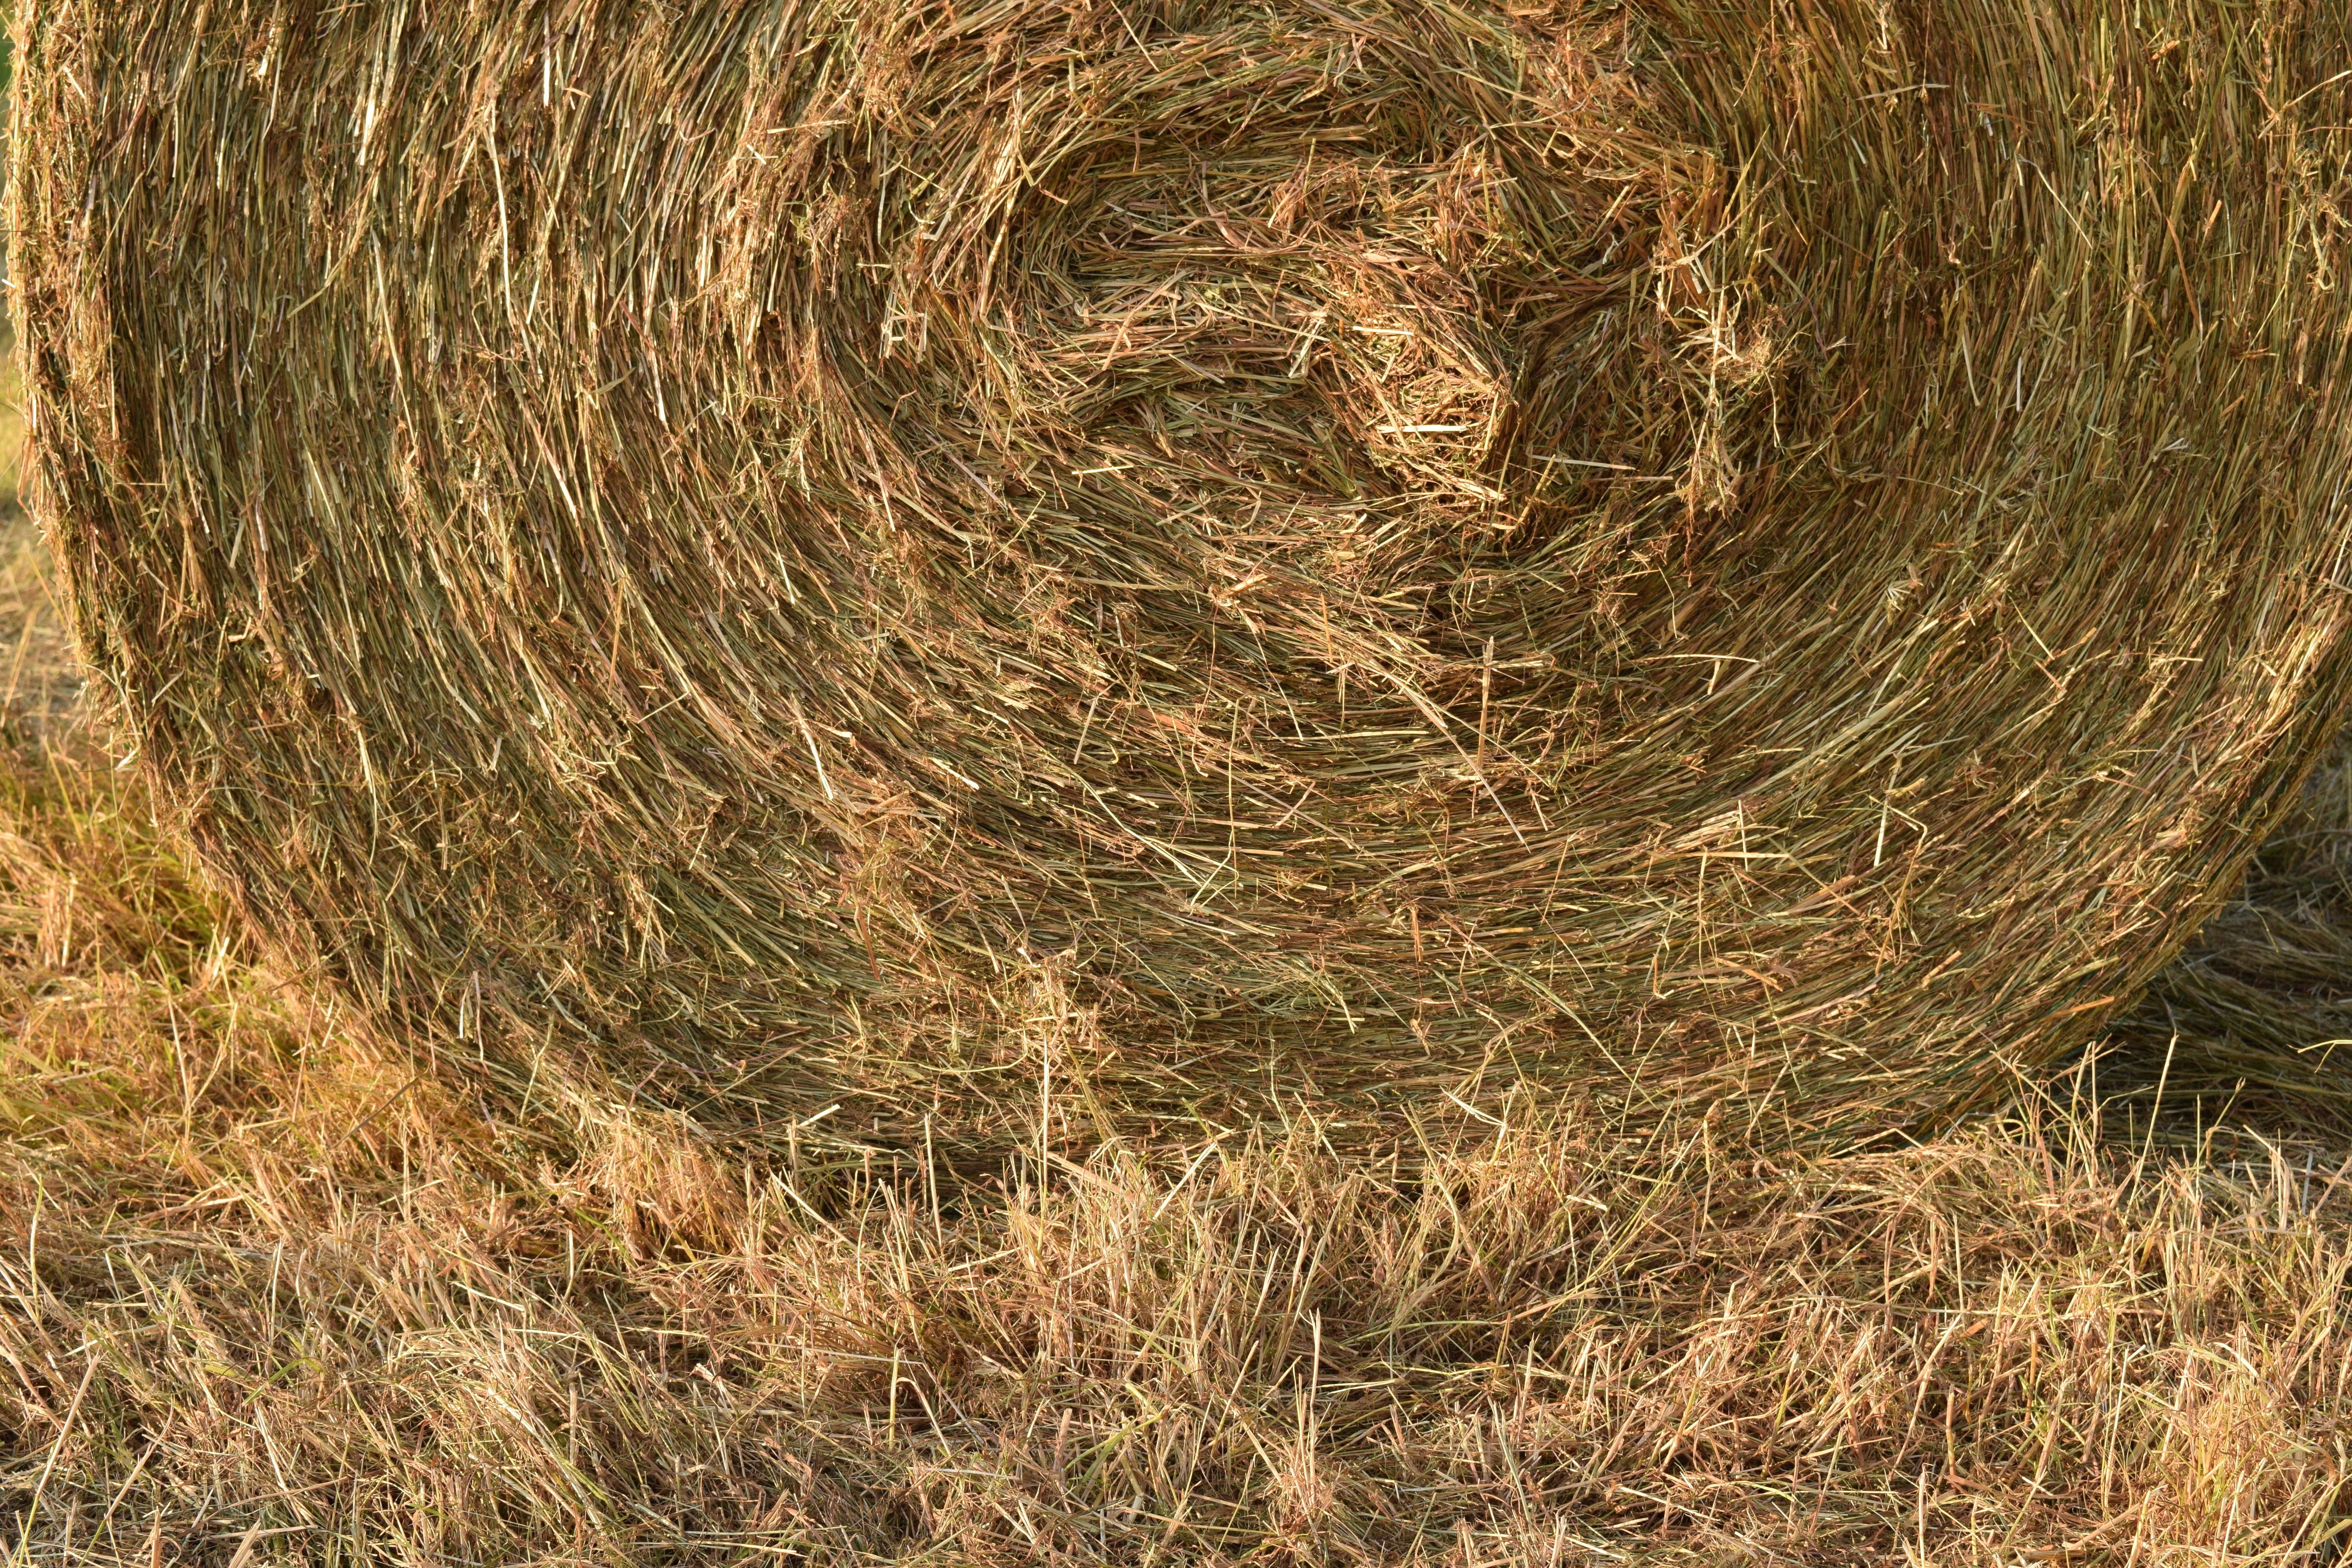 Hay Bales, Hay, Round Bales, Agriculture, field, grass